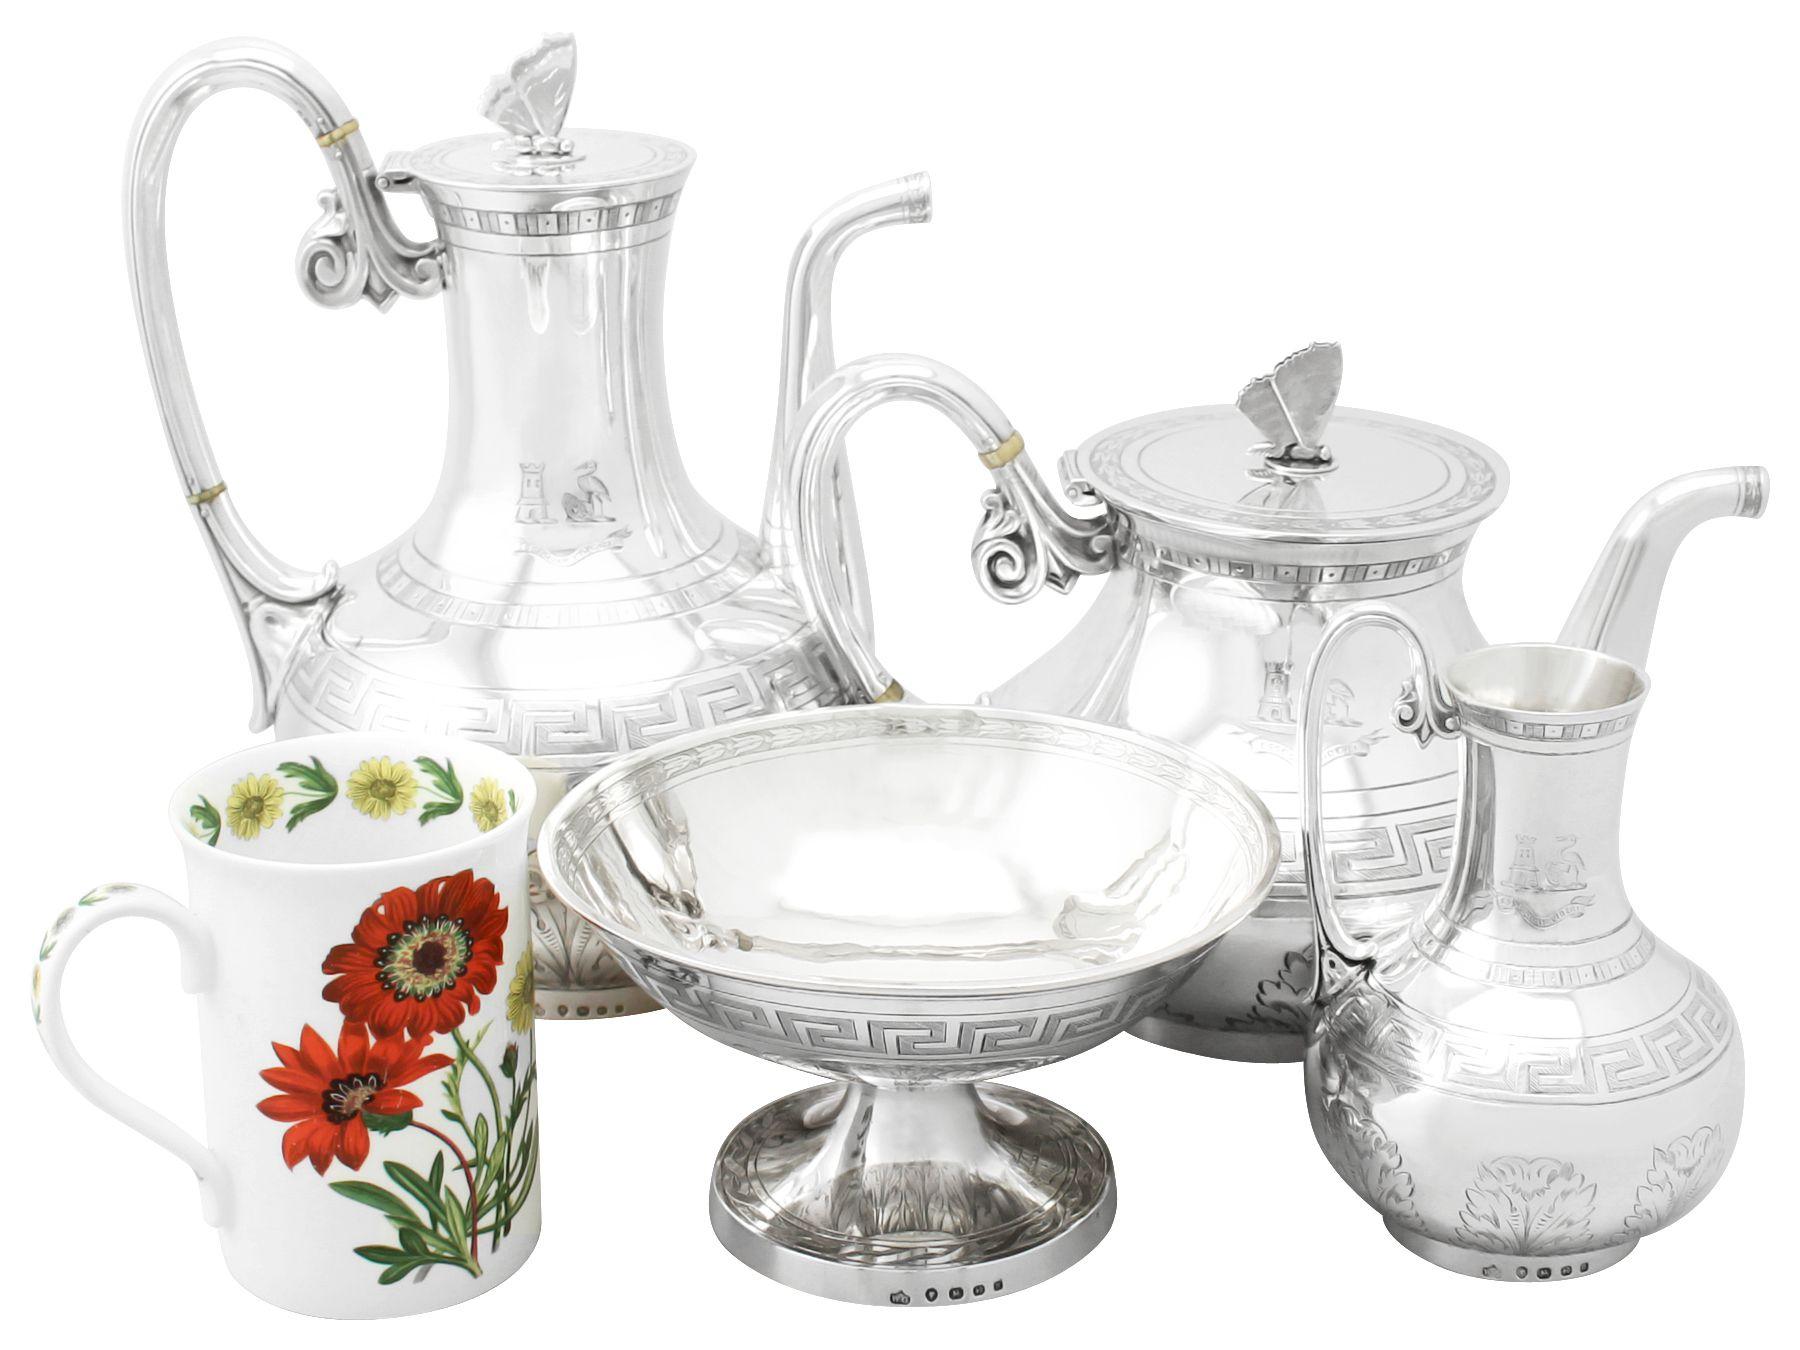 A fine, impressive and unusual antique Victorian English sterling silver composite four piece tea and coffee service / set in the Aesthetic style; part of our silver teaware collection.

This exceptional and unusual Victorian sterling silver tea